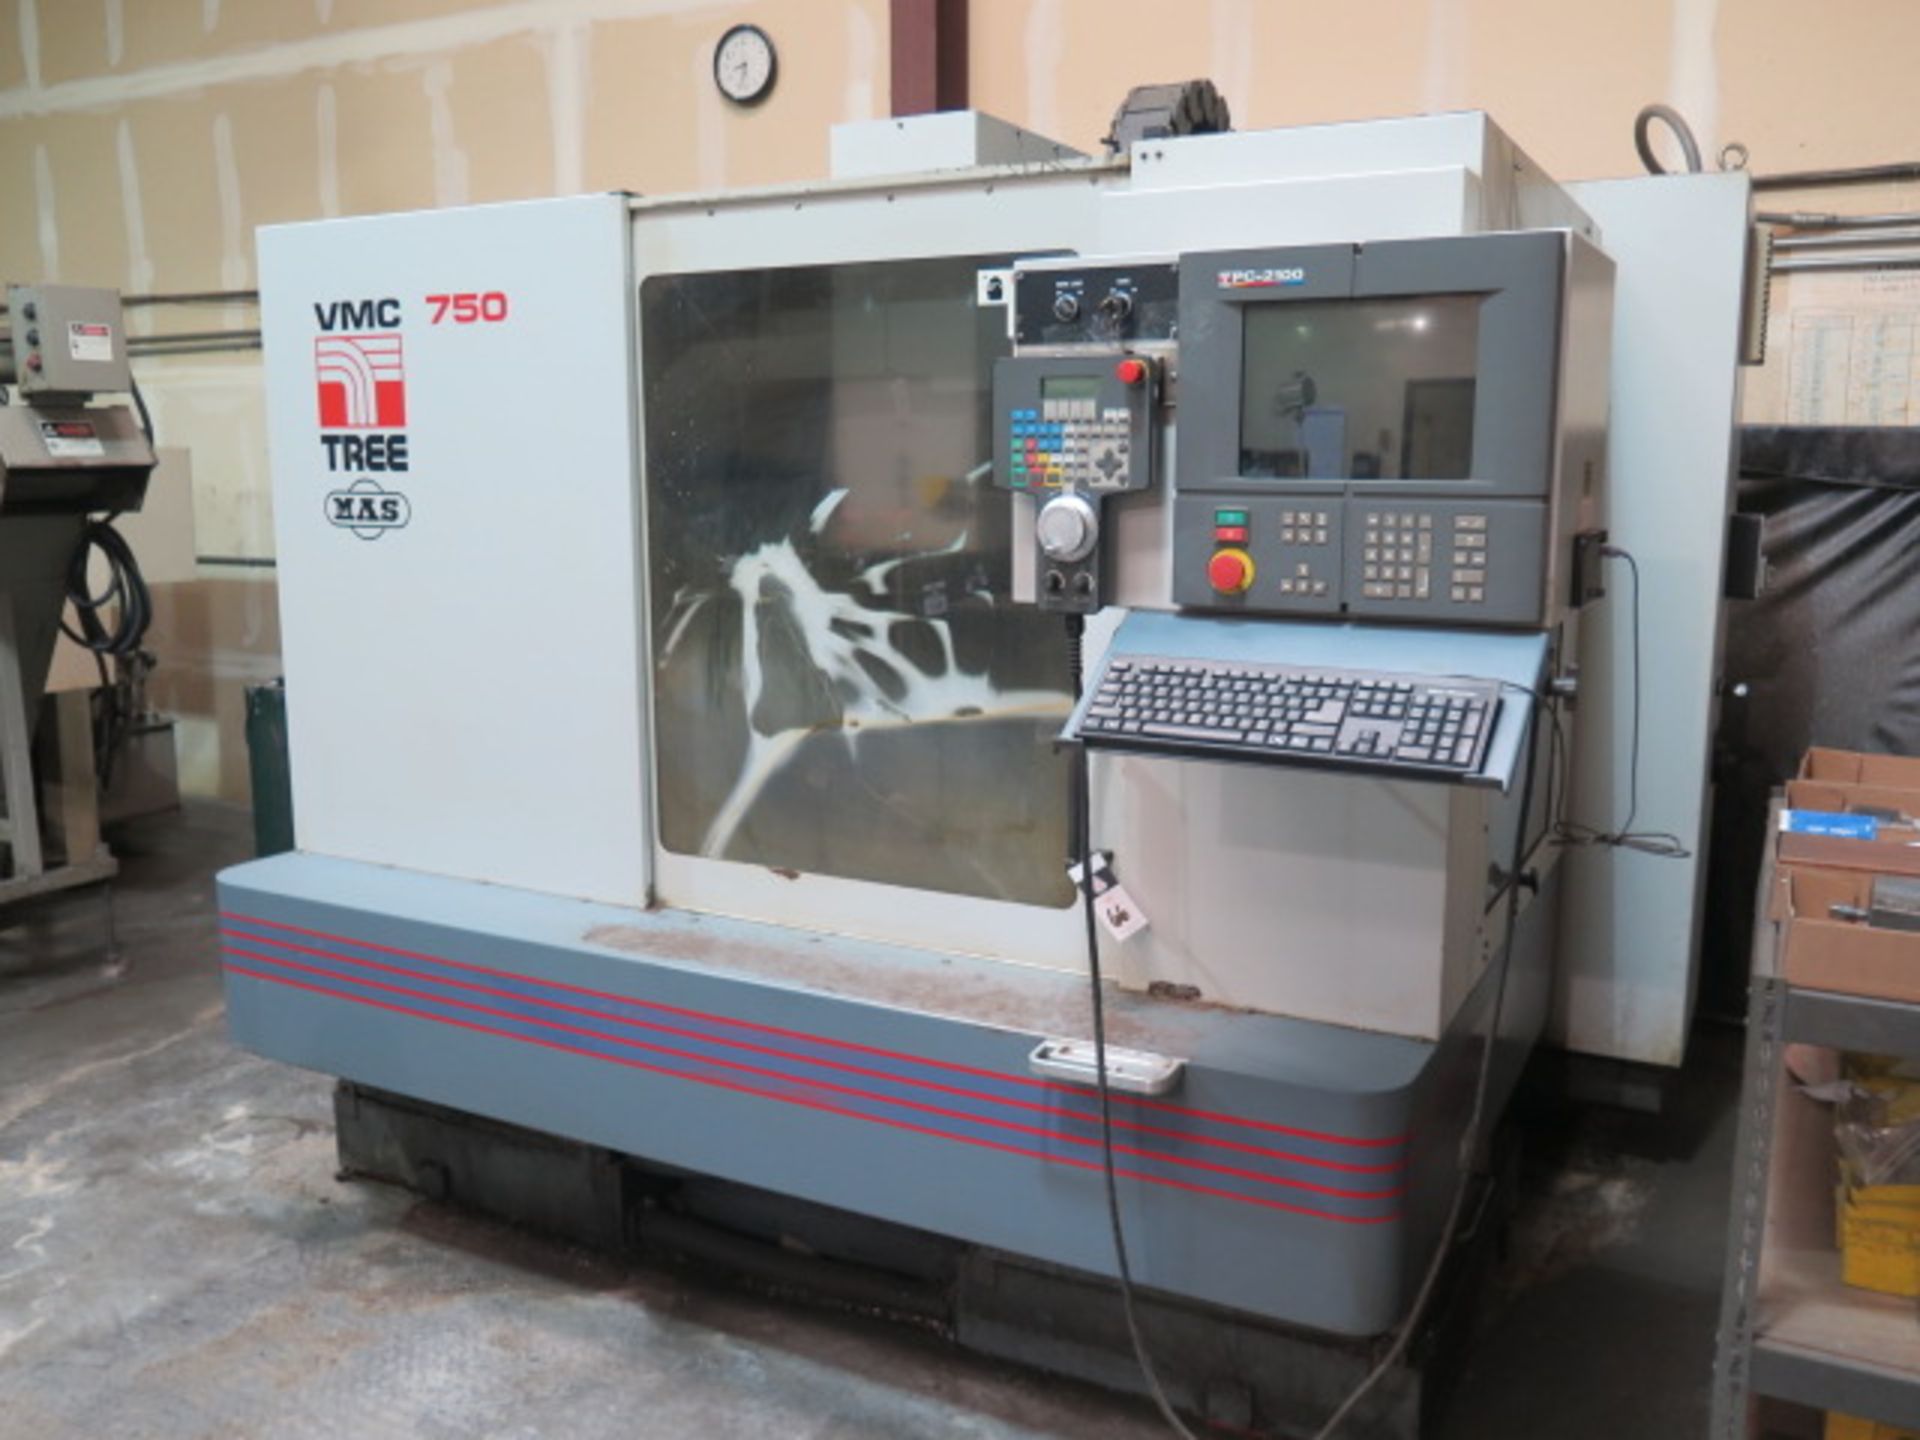 Tree / MAS VMC750 CNC Vertical Machining Center s/n 985961201 w/ Tree PC-2100 Controls, SOLD AS IS - Image 3 of 16